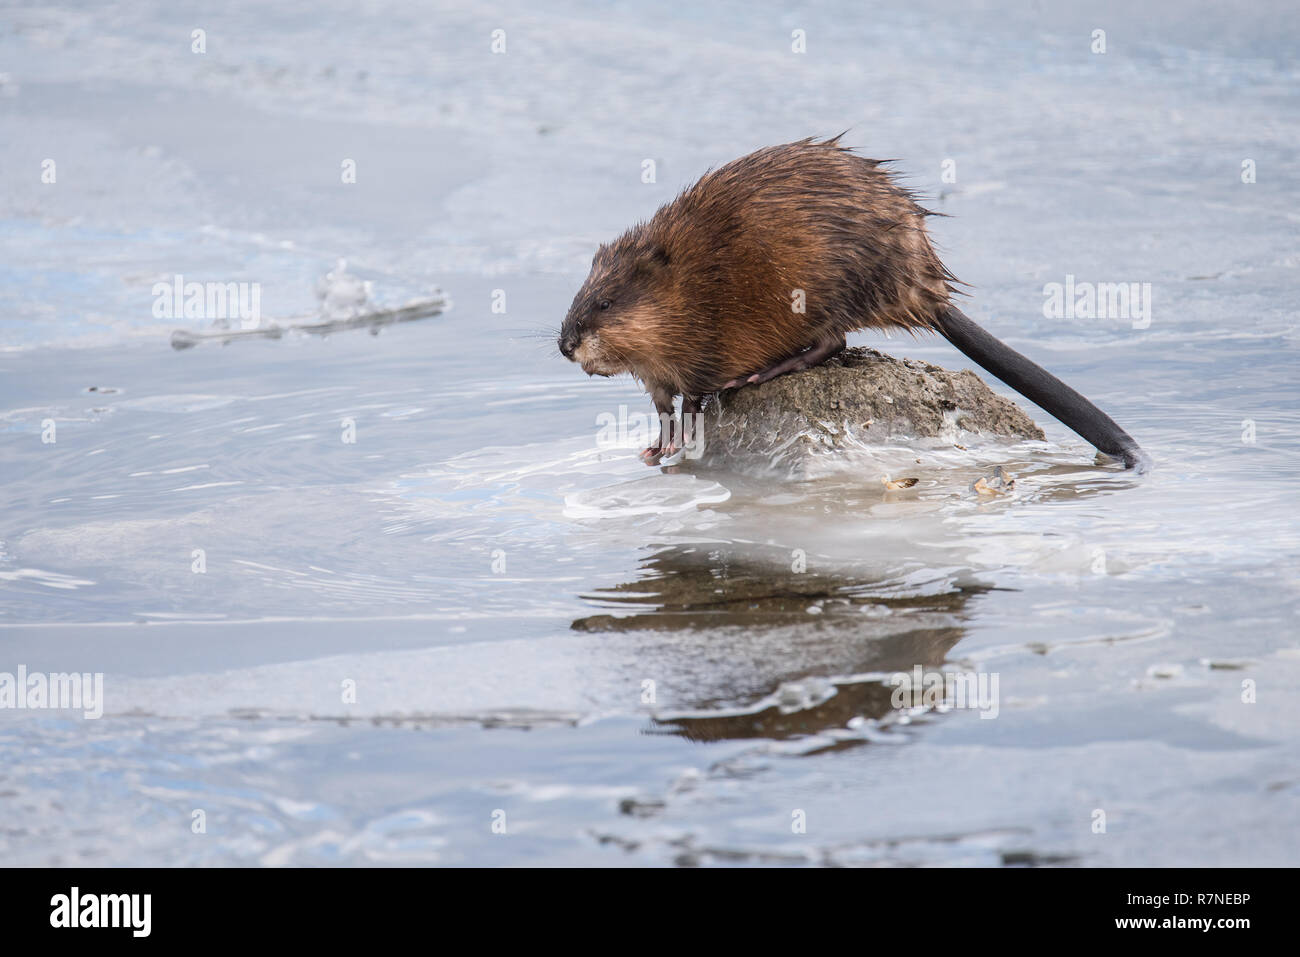 A muskrat pauses before diving into the icy water in search of mussels at Colonel Samuel Smith Park in Toronto, Ontario, Canada. Stock Photo